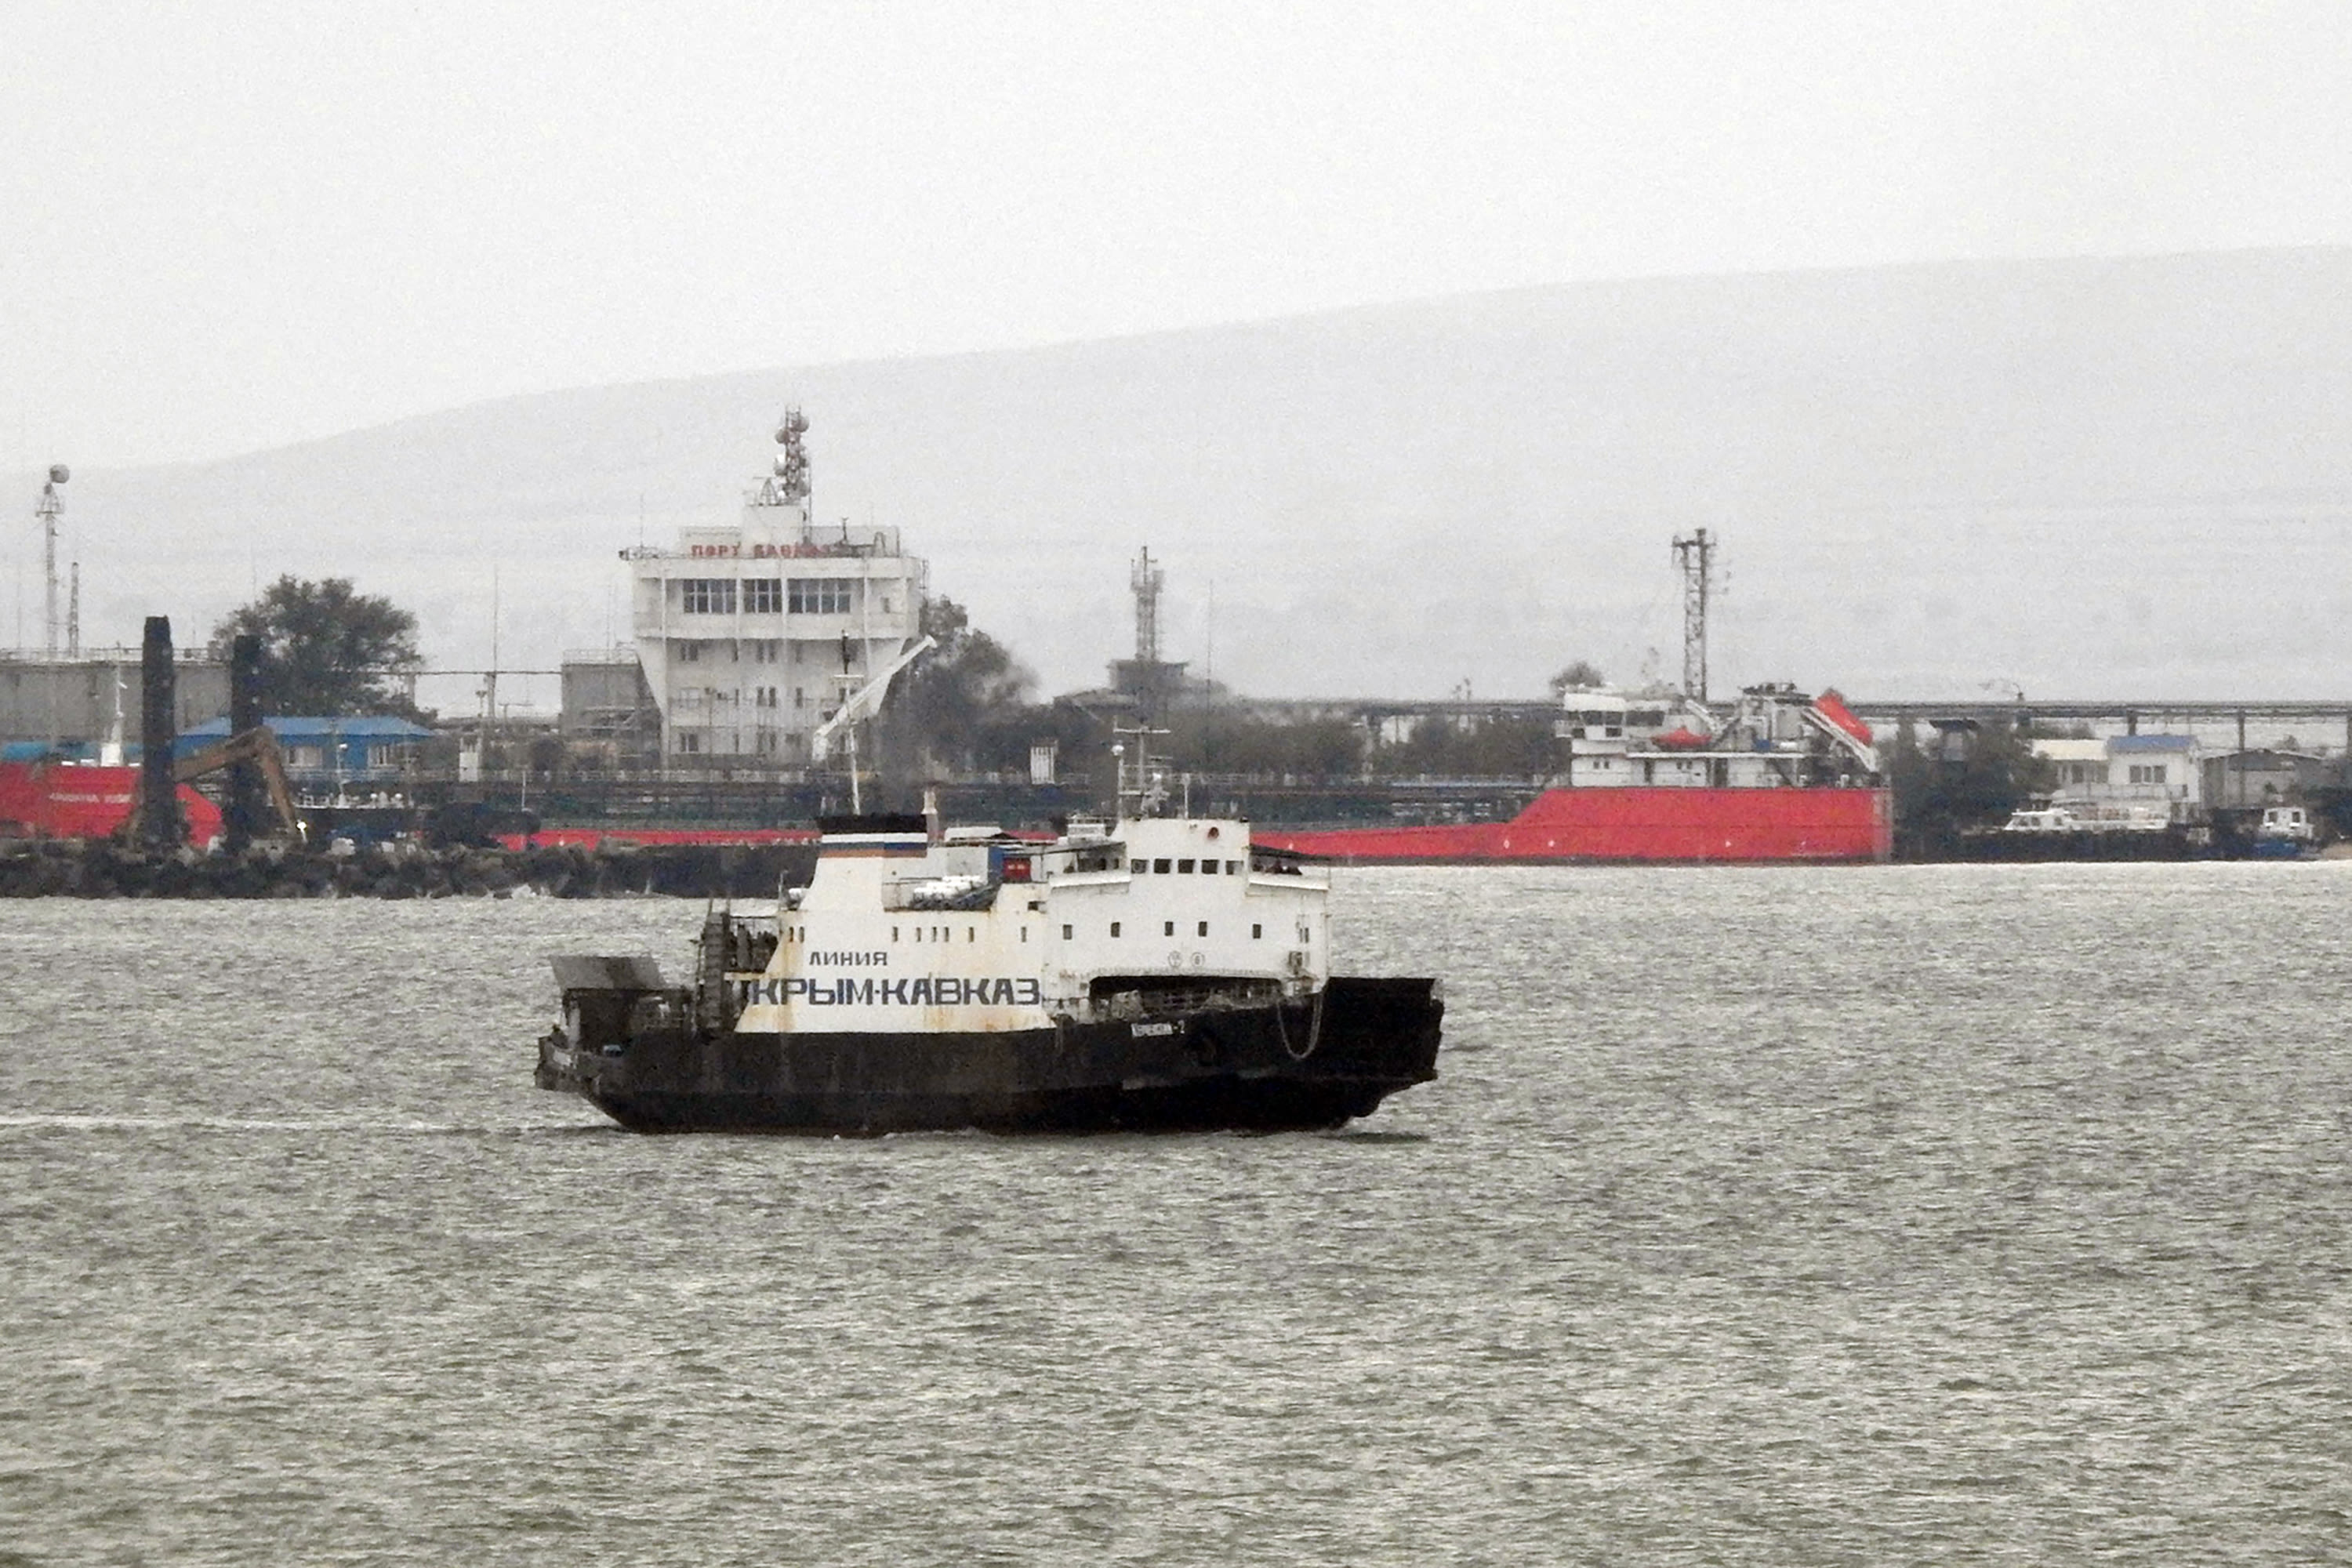 Crimea photos show aftermath of ATACMS strike on Kerch ferry crossing